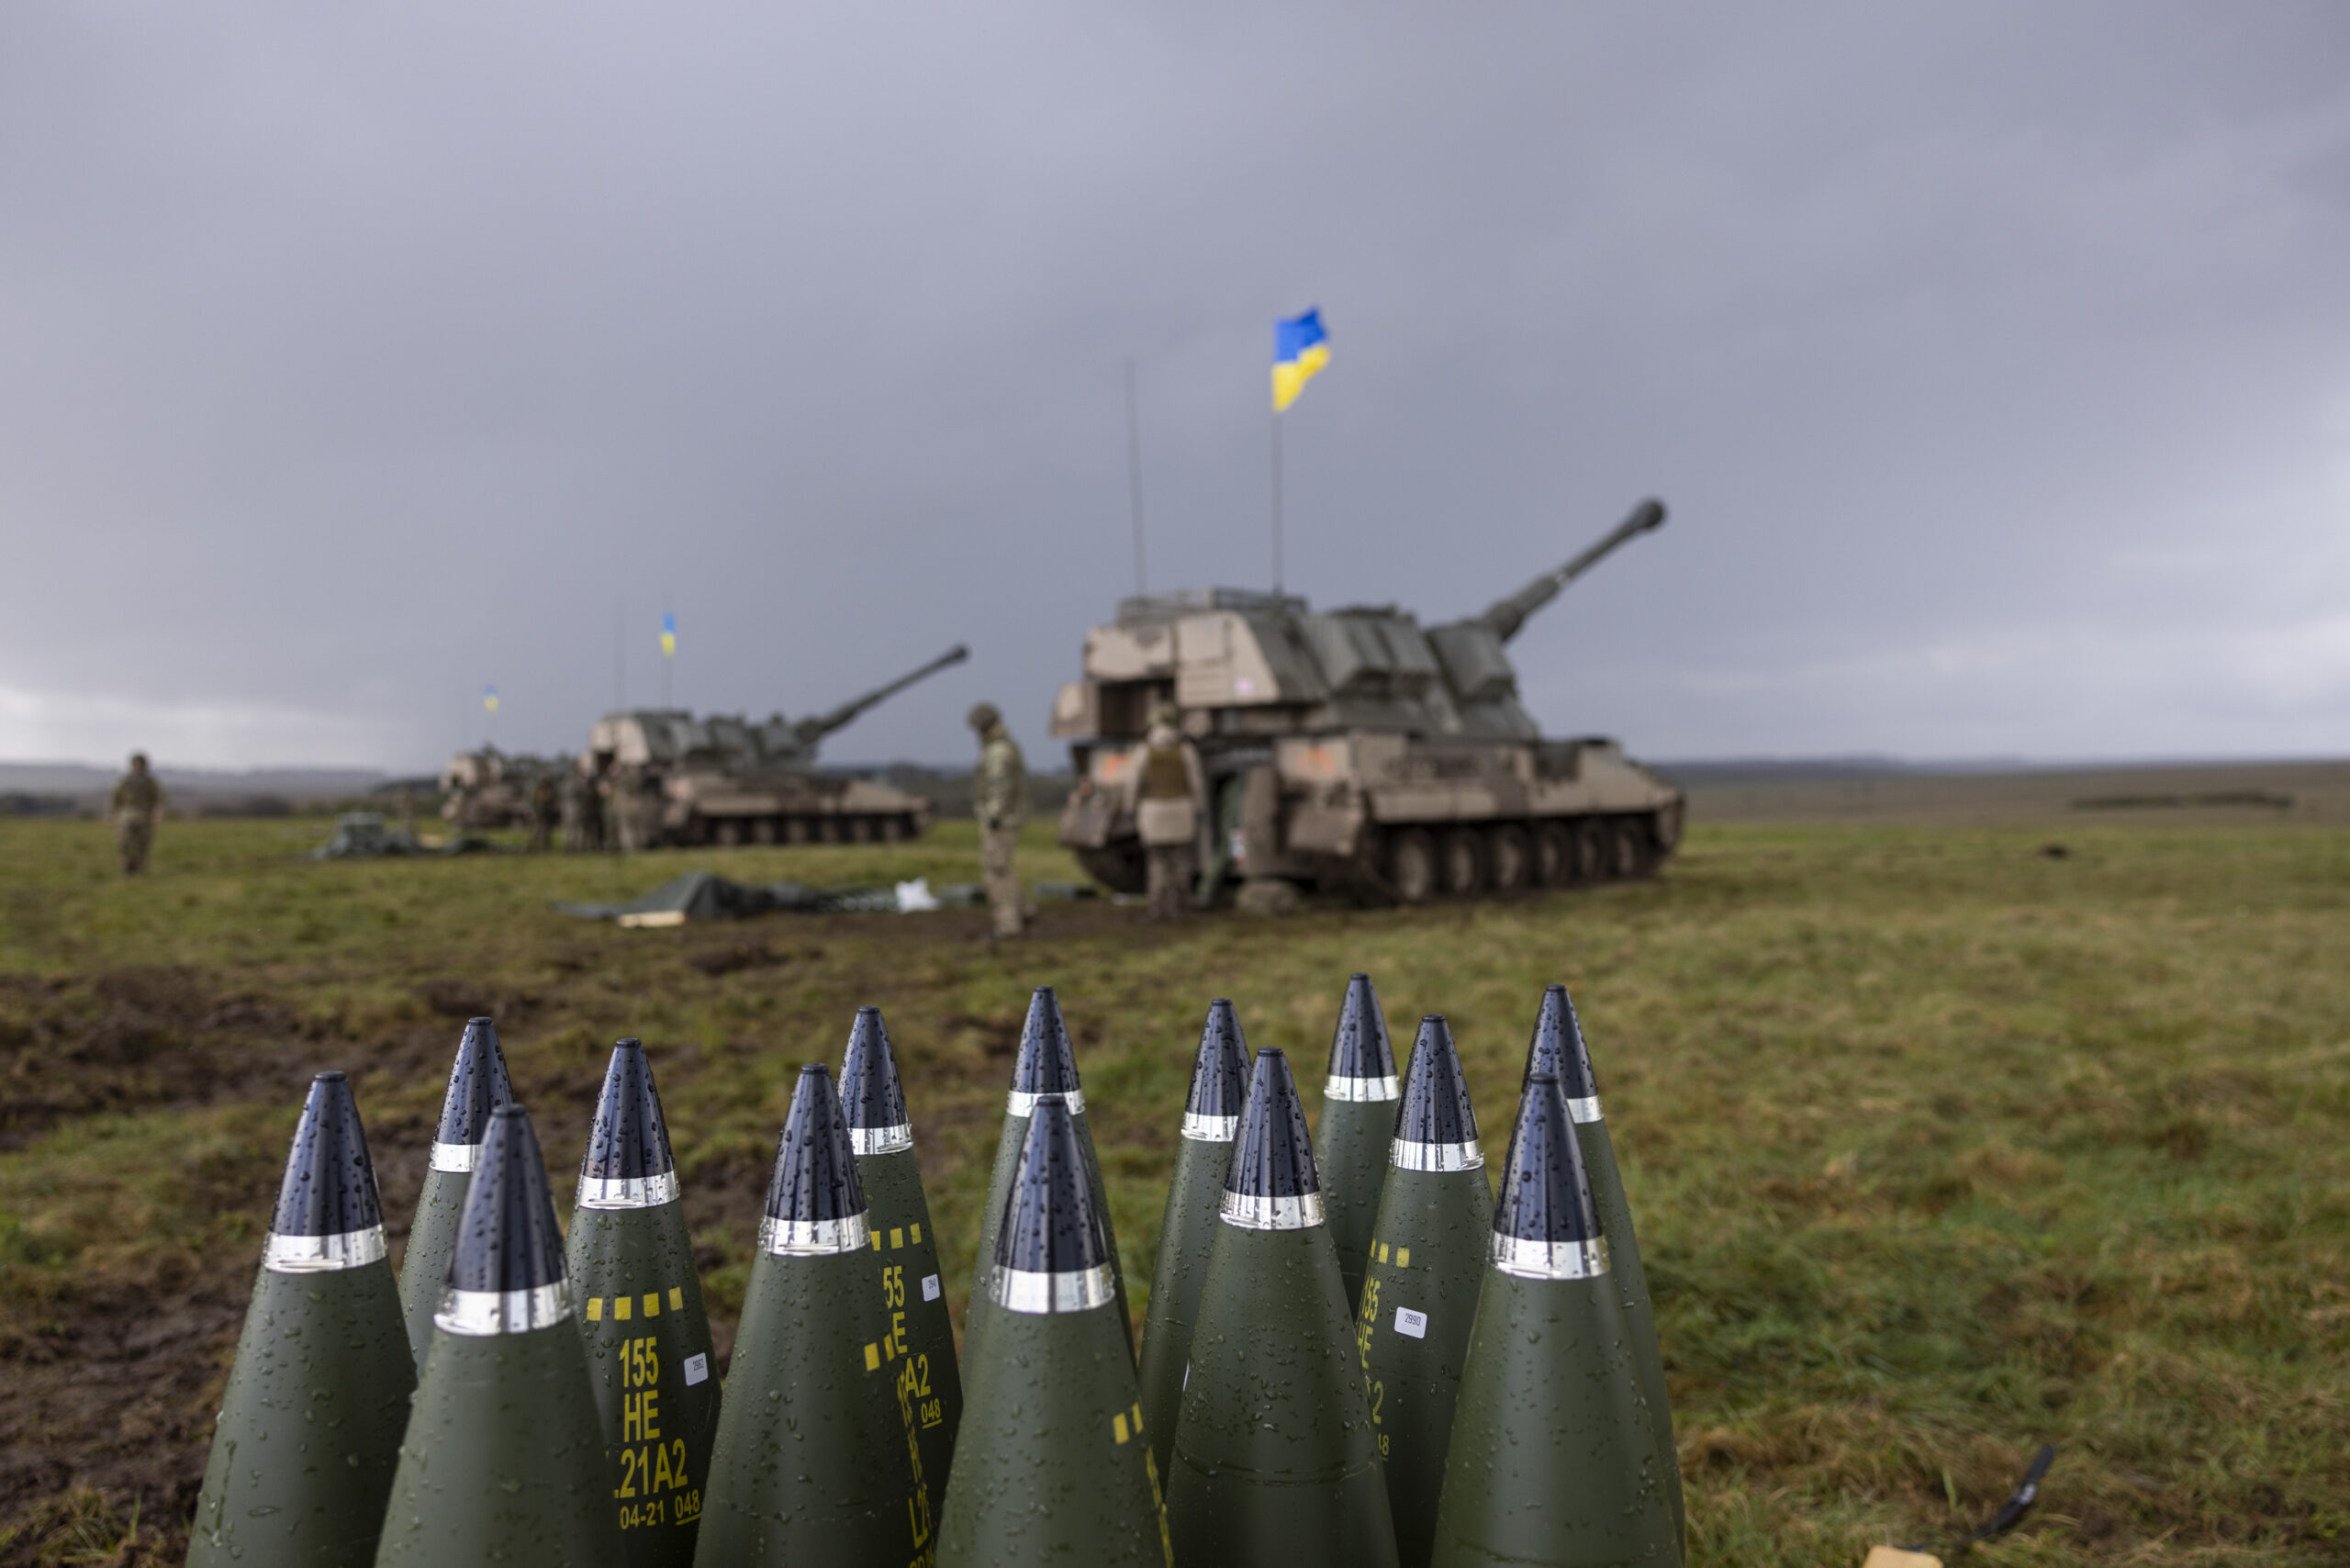 155mm artillery rounds stacked up behind the line of AS90s and their Ukrainian operators. Photographer: Corporal Rob Kane ©MoD Crown Copyright 2022